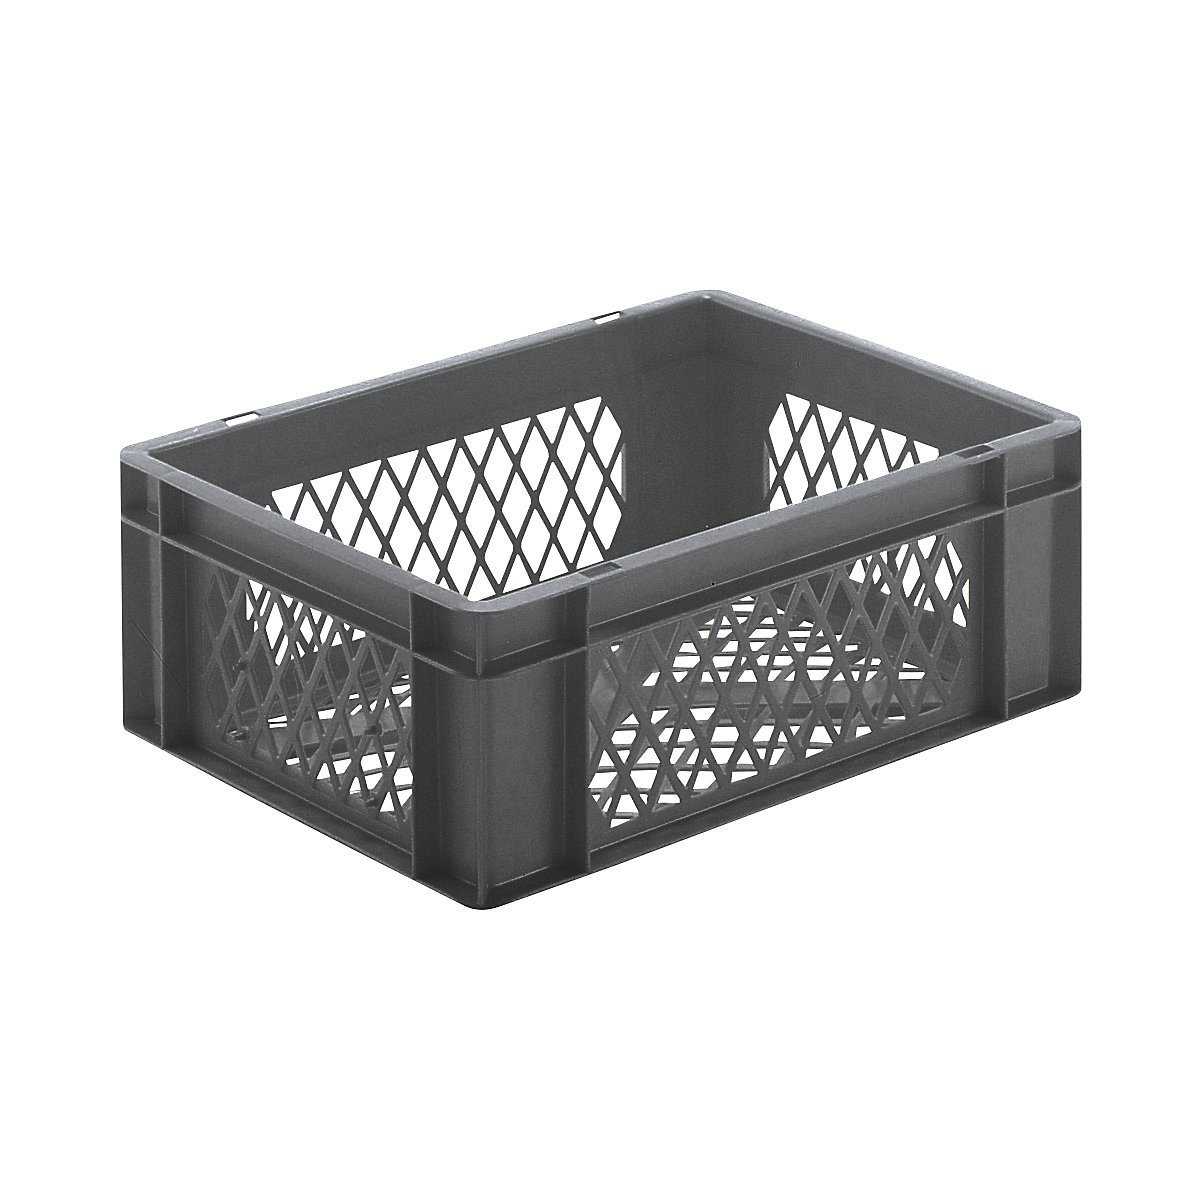 Euro stacking container, perforated walls and base, LxWxH 400 x 300 x 145 mm, grey, pack of 5-4